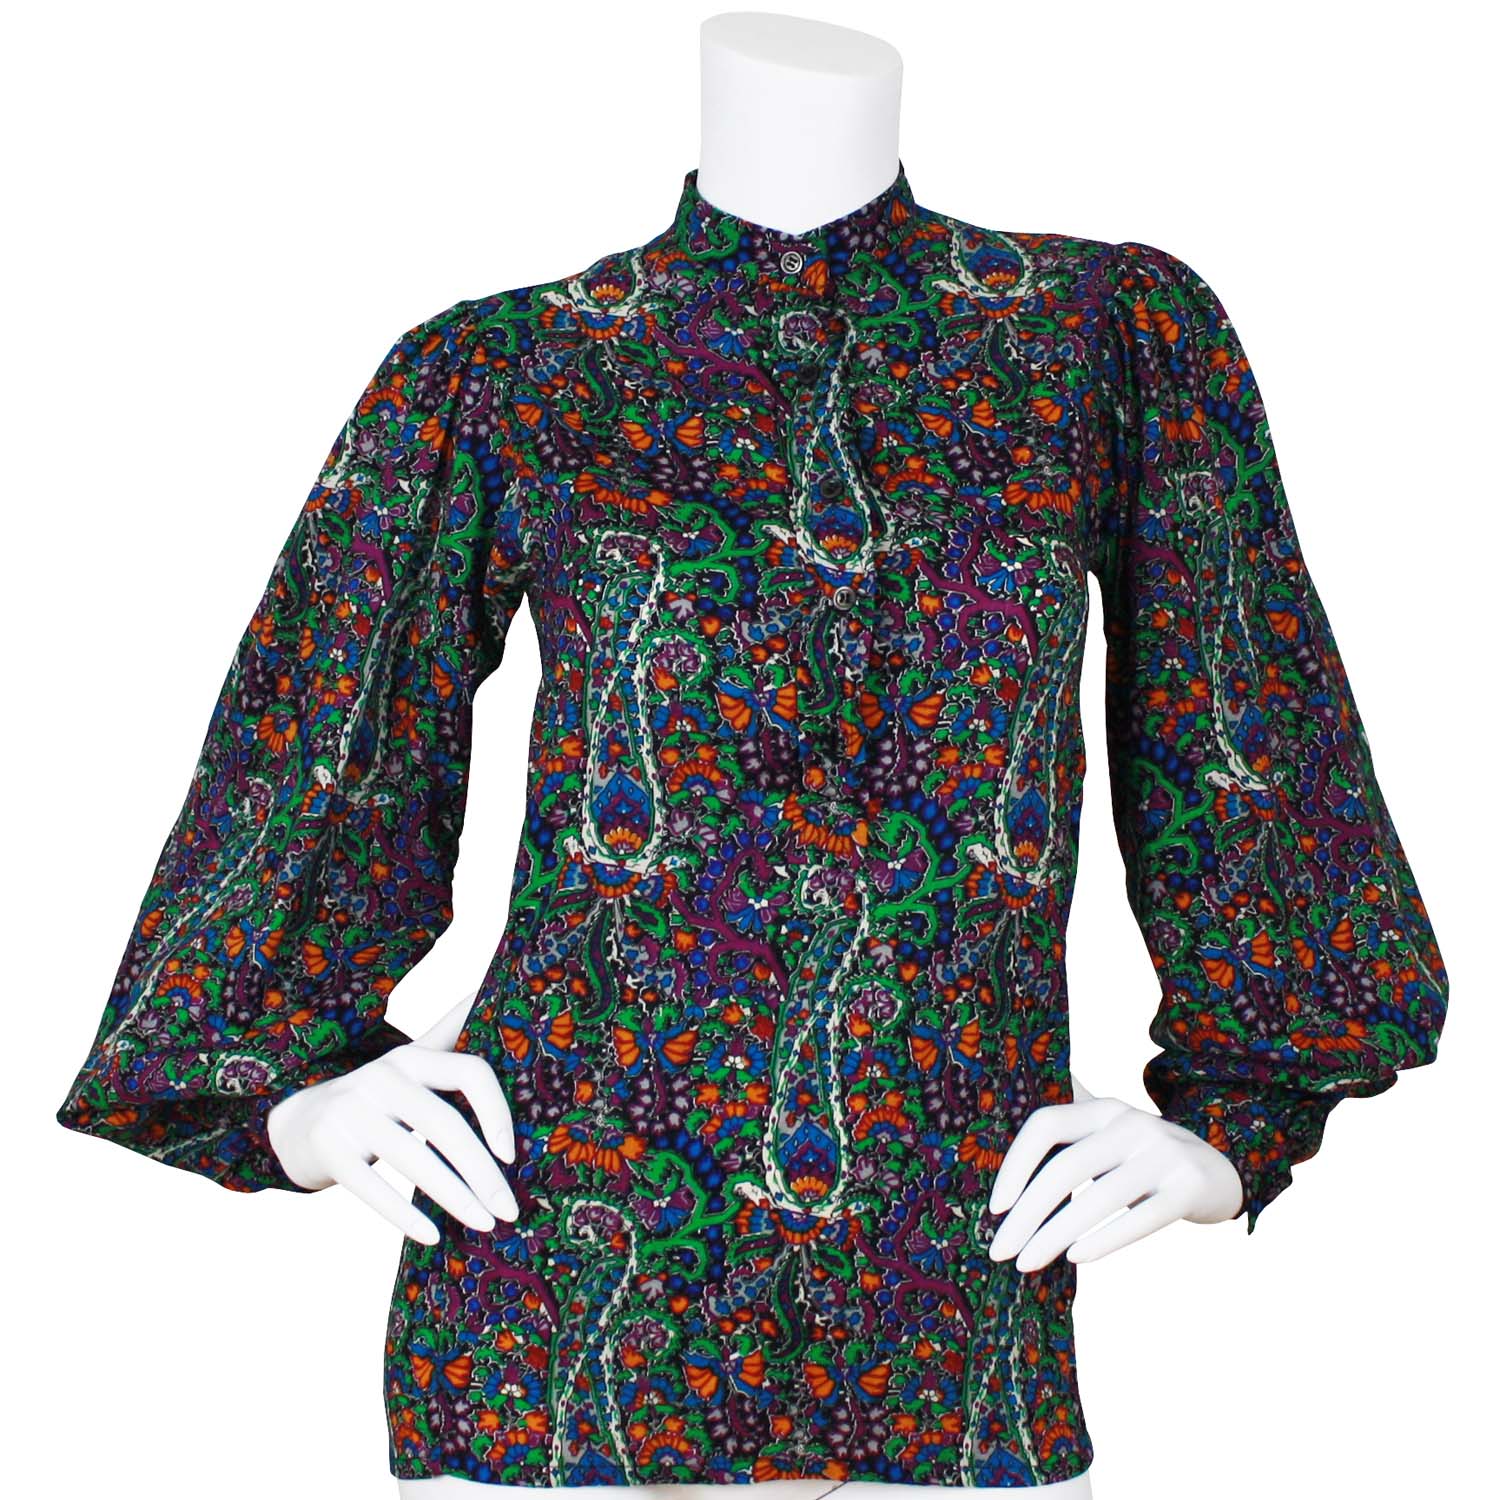 Featherstone Vintage: YVES SAINT LAURENT IN NEW ITEMS